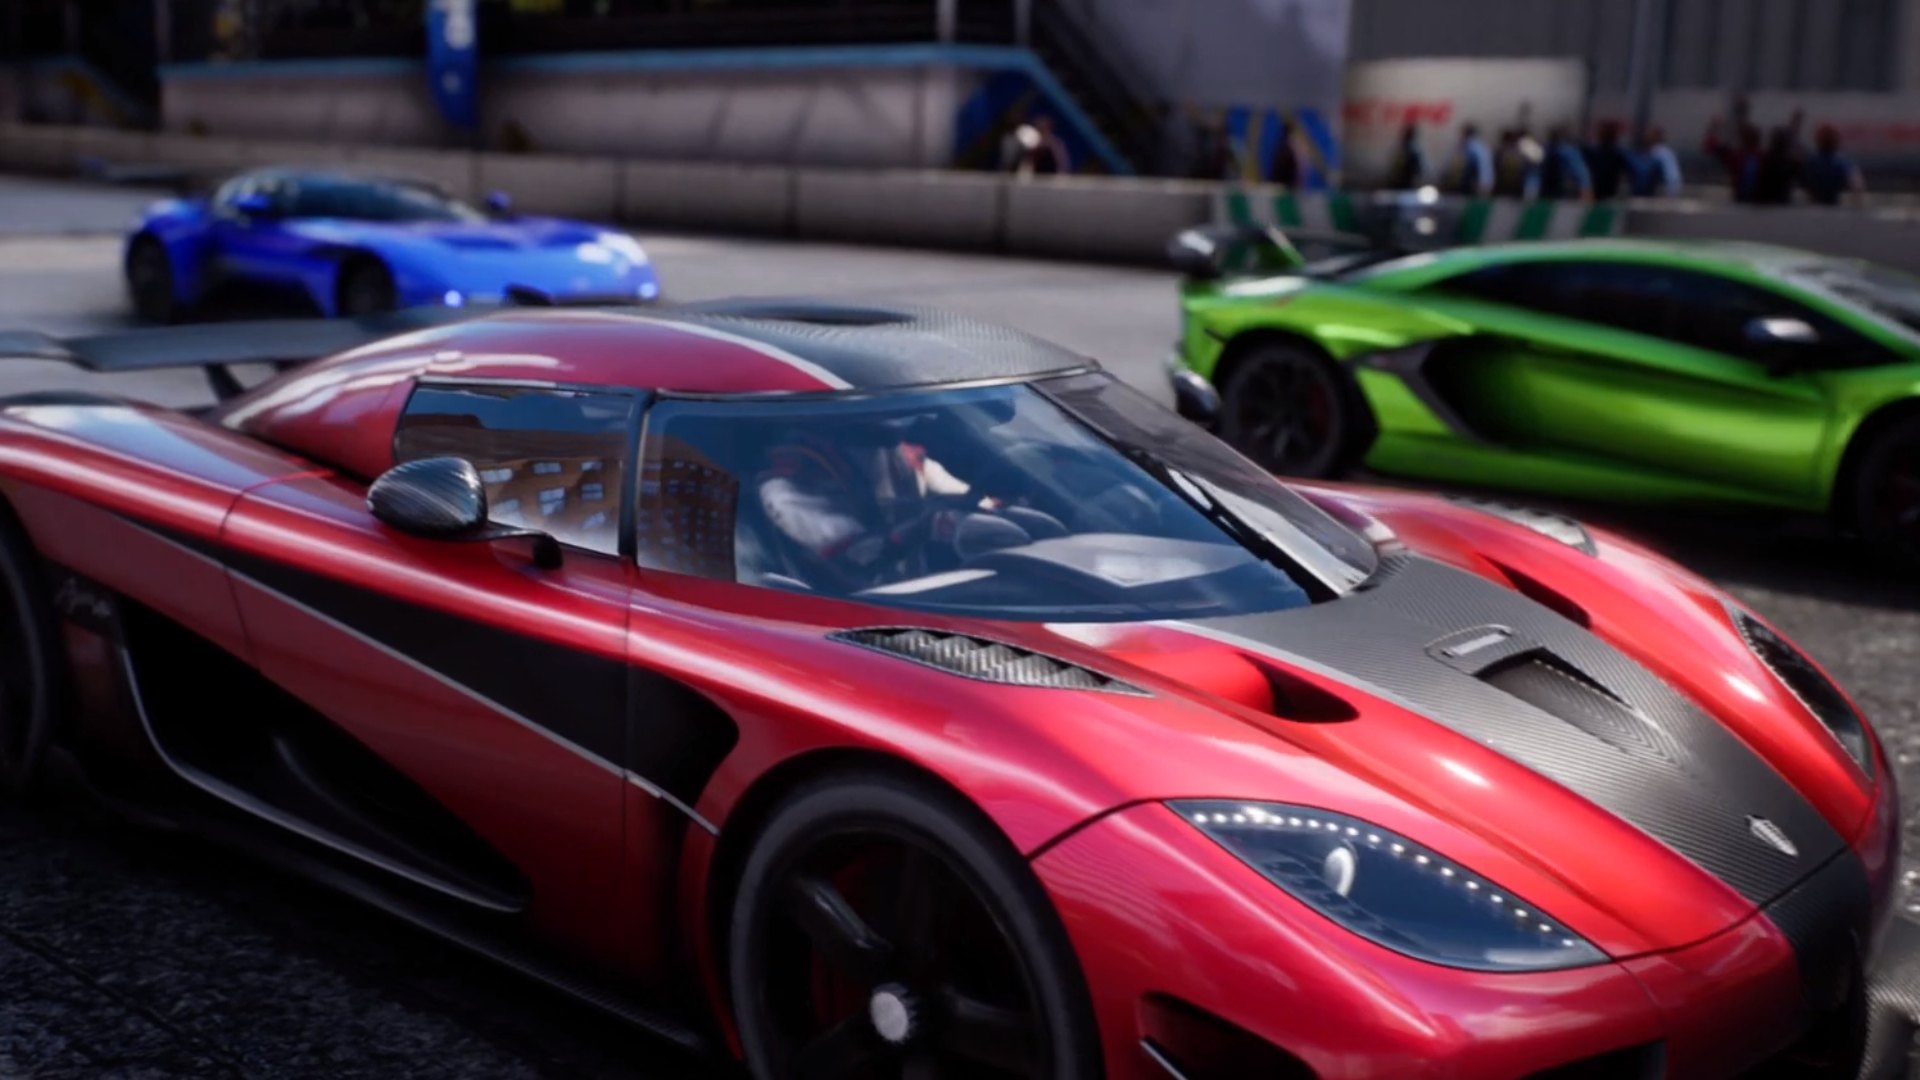 Racing Master is a “best-in-class” racer from NetEase and Codemasters